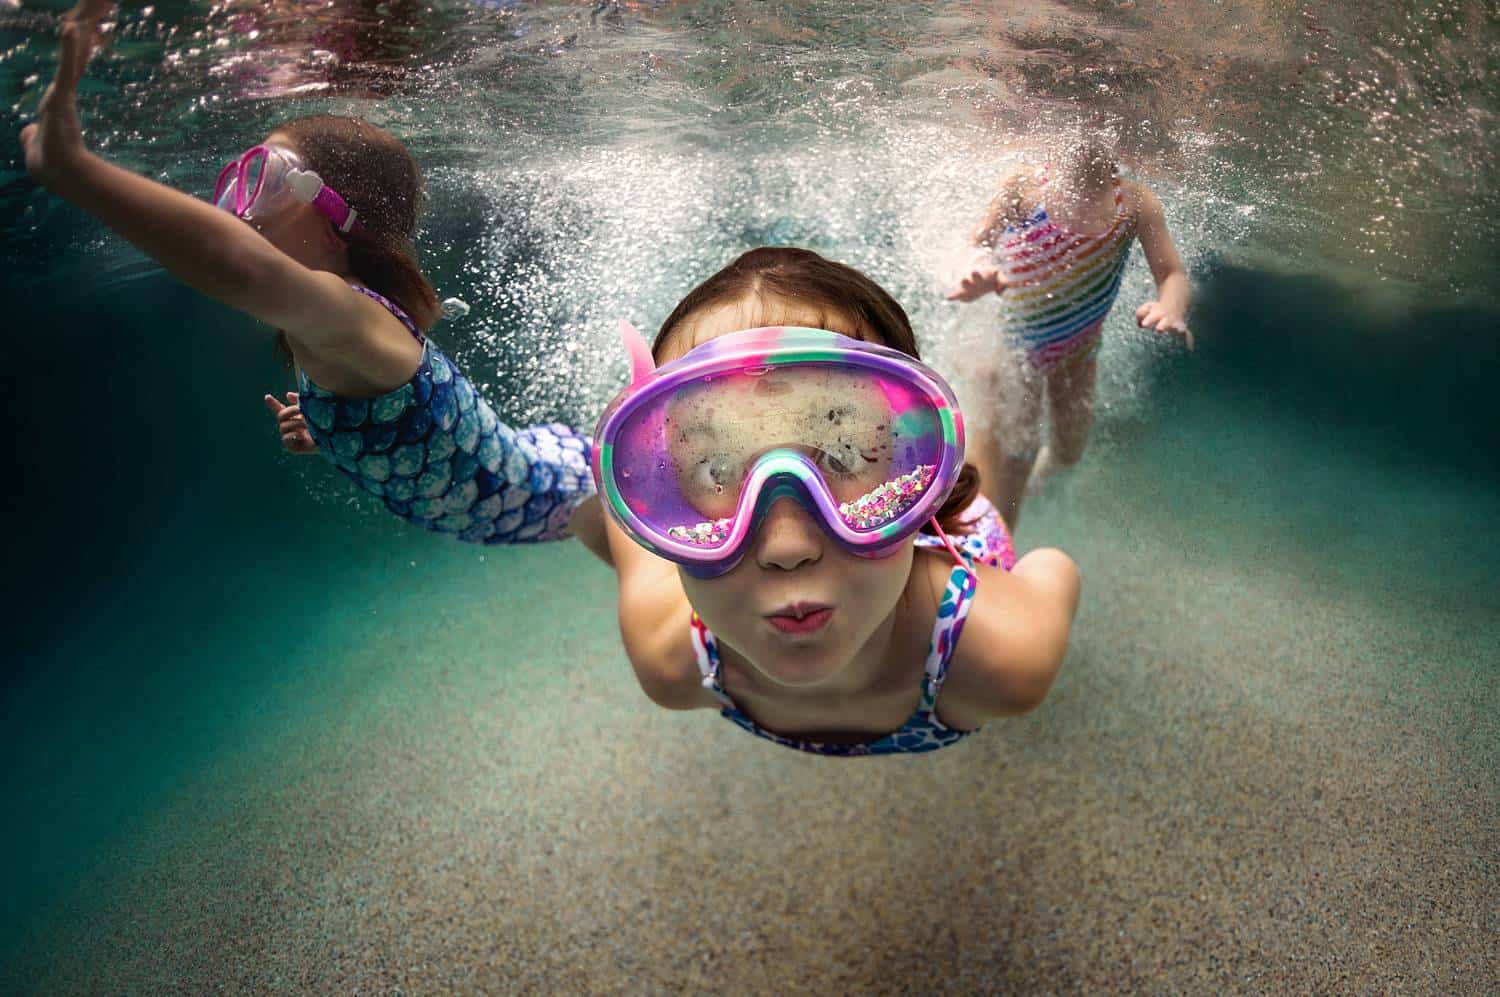 A child wearing oversized purple goggles swims toward the camera